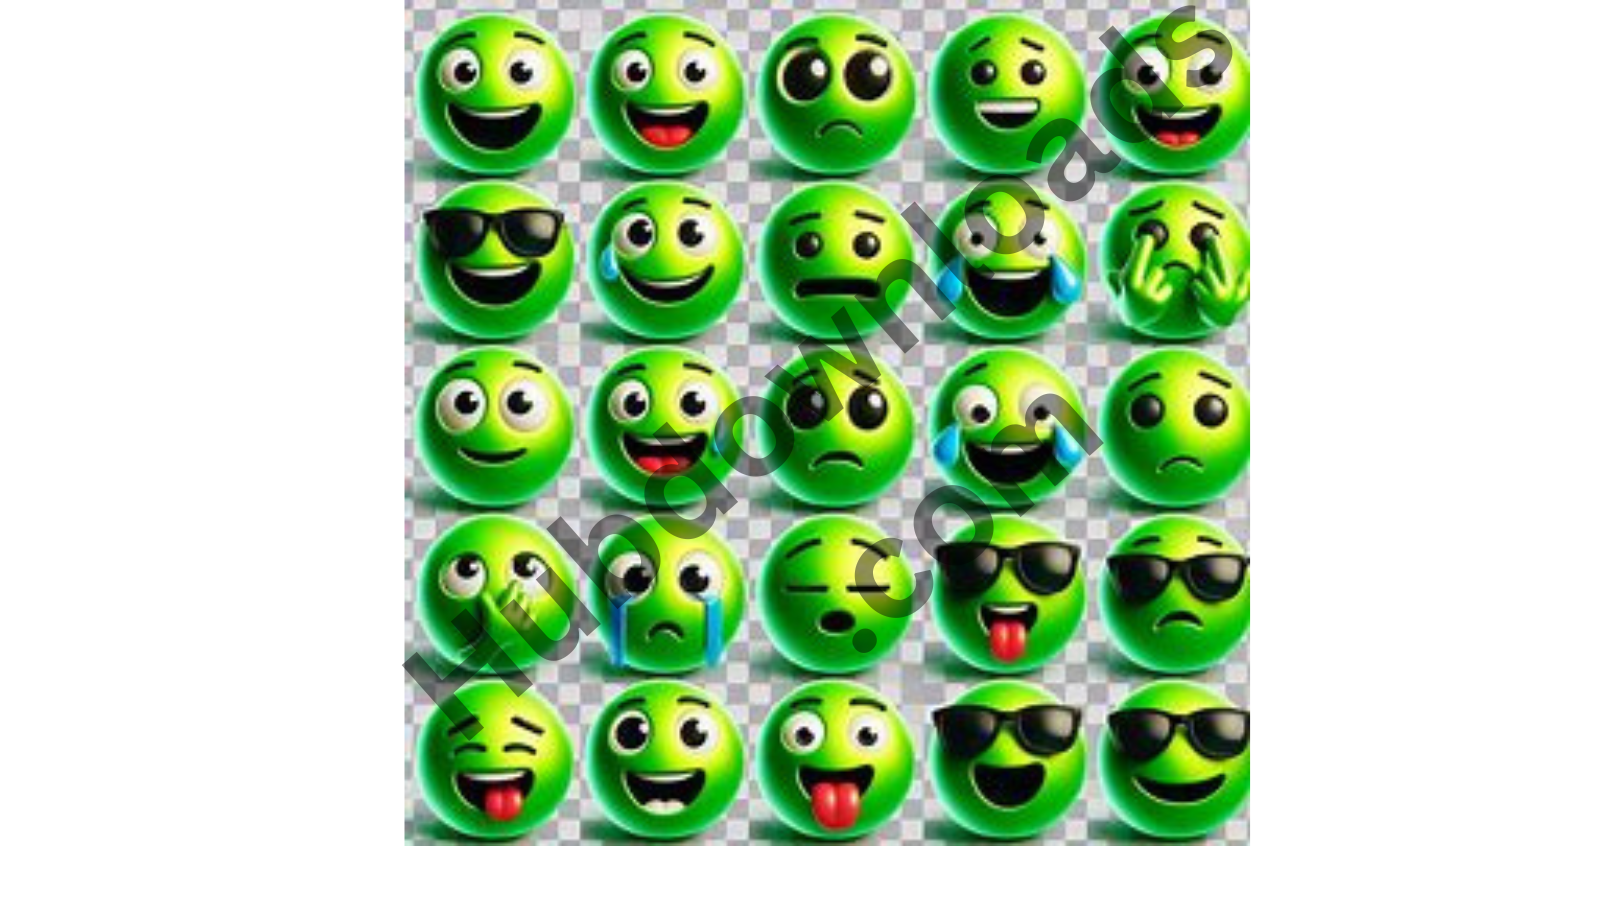 A collage of 25 vibrant 3D green emojis conveying various feelings, including happiness, sadness, excitement, and more